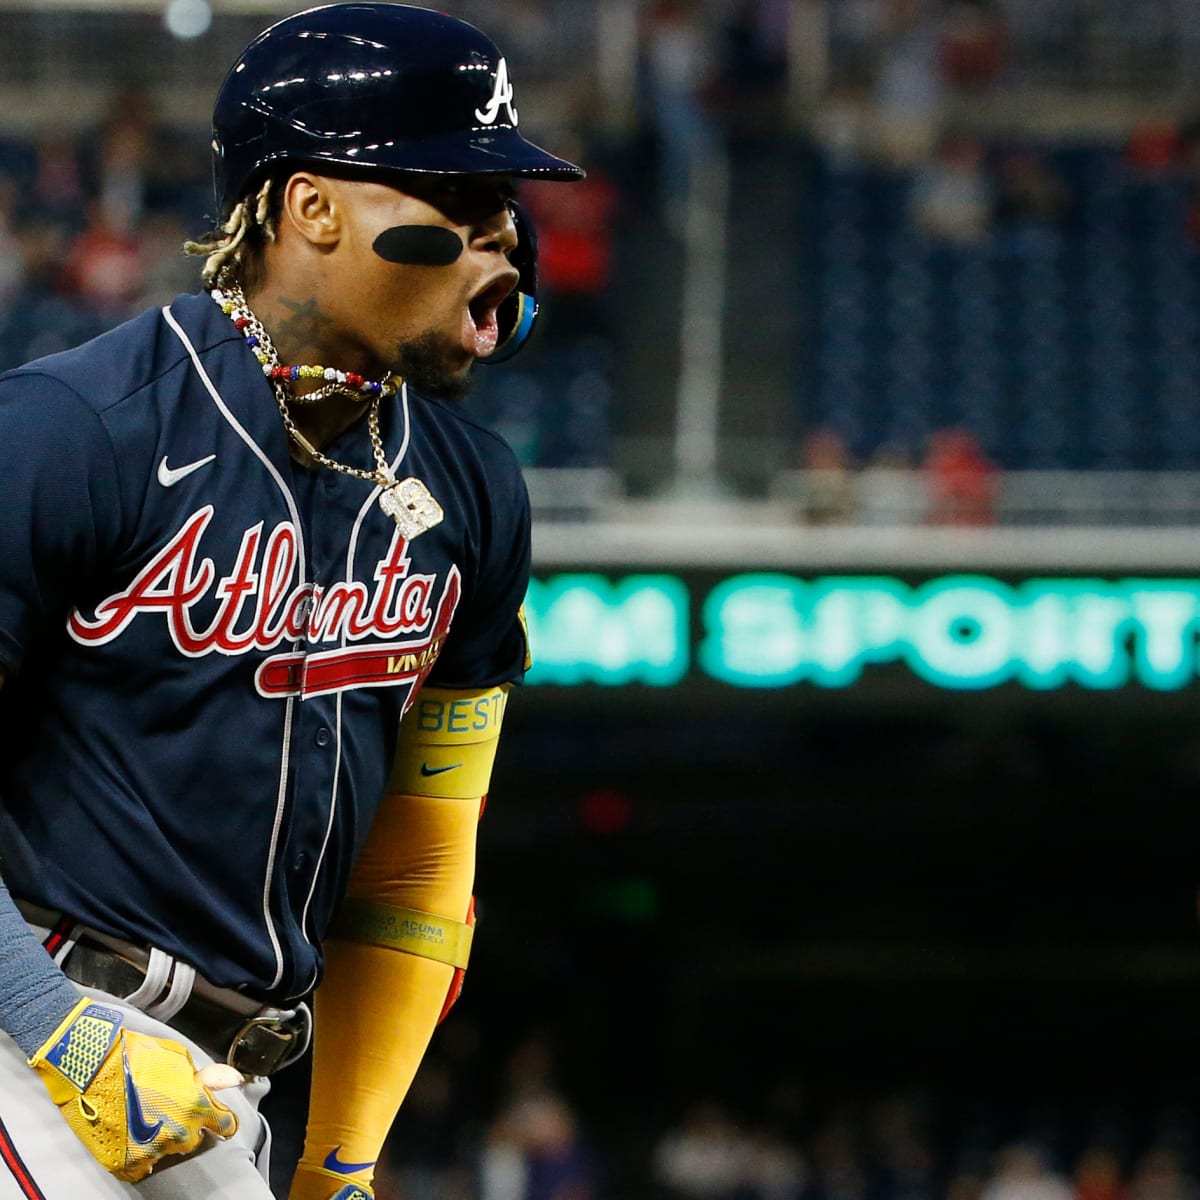 Ronald Acuña Jr.: Atlanta Braves Star Joins MLB's Fabled 40/40 Club -  Sports Illustrated